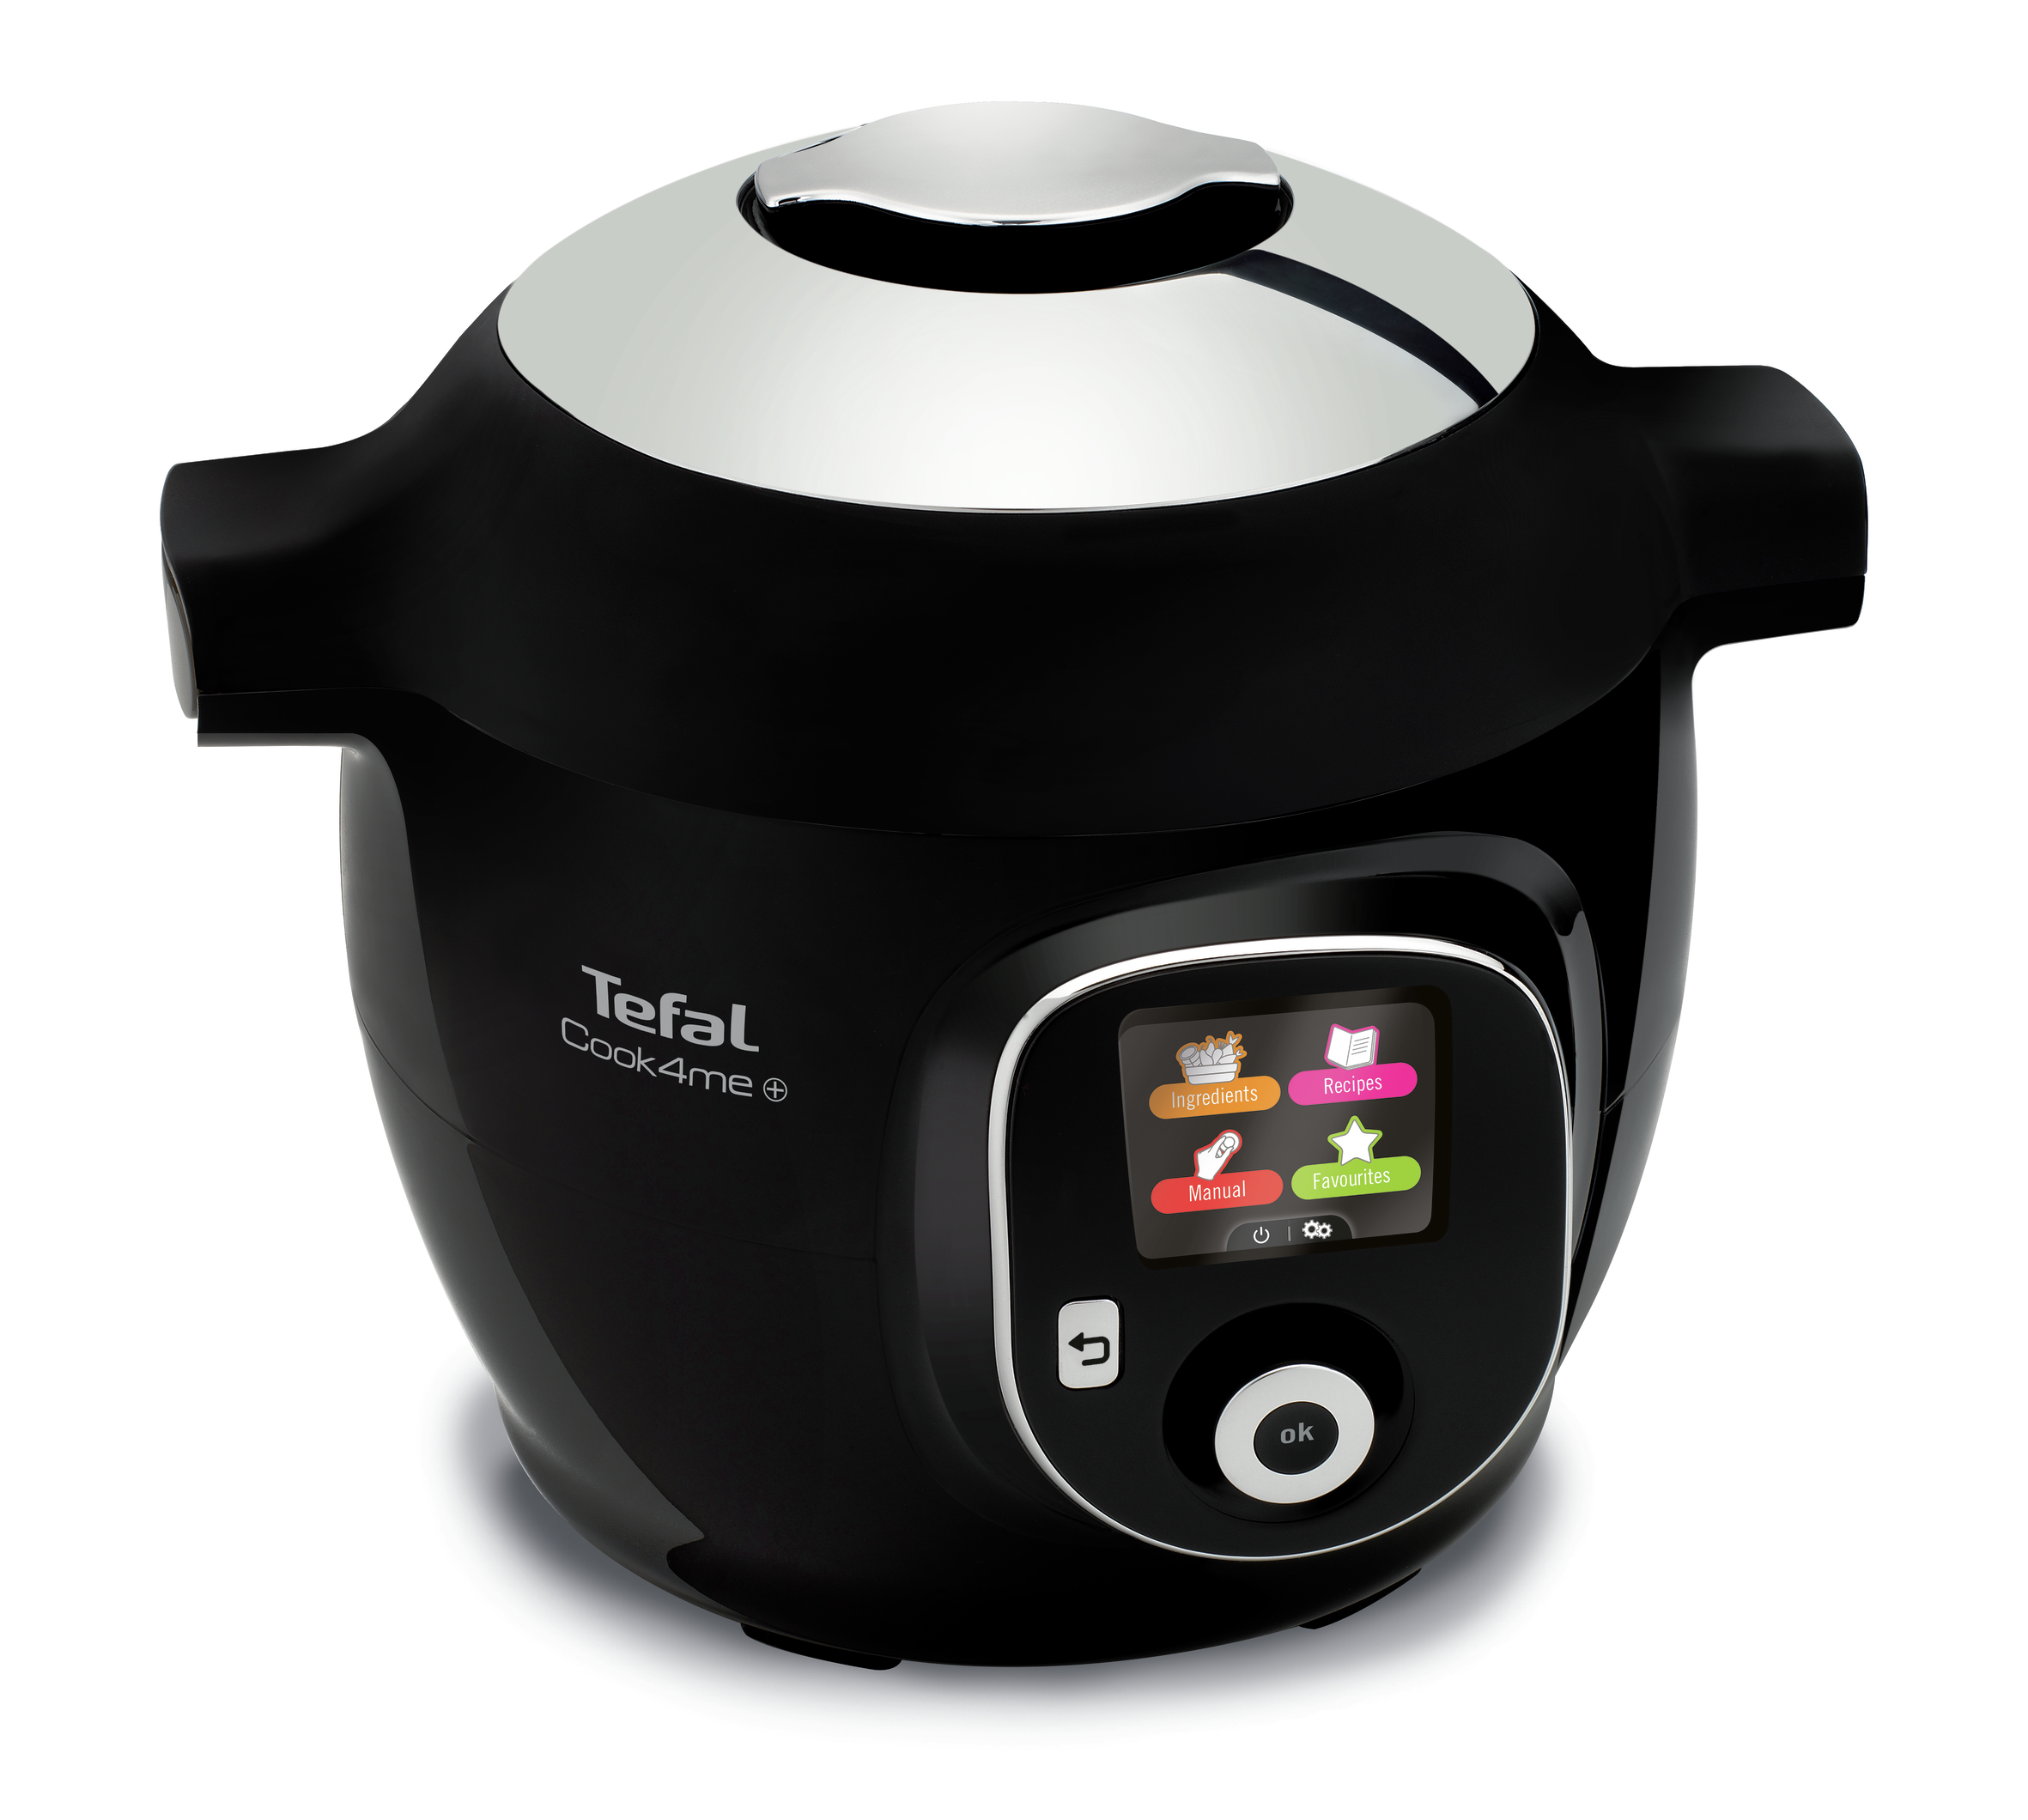 Tefal Cook4me+ Black CY8518 Smart Multi Cooker and Pressure Cooker